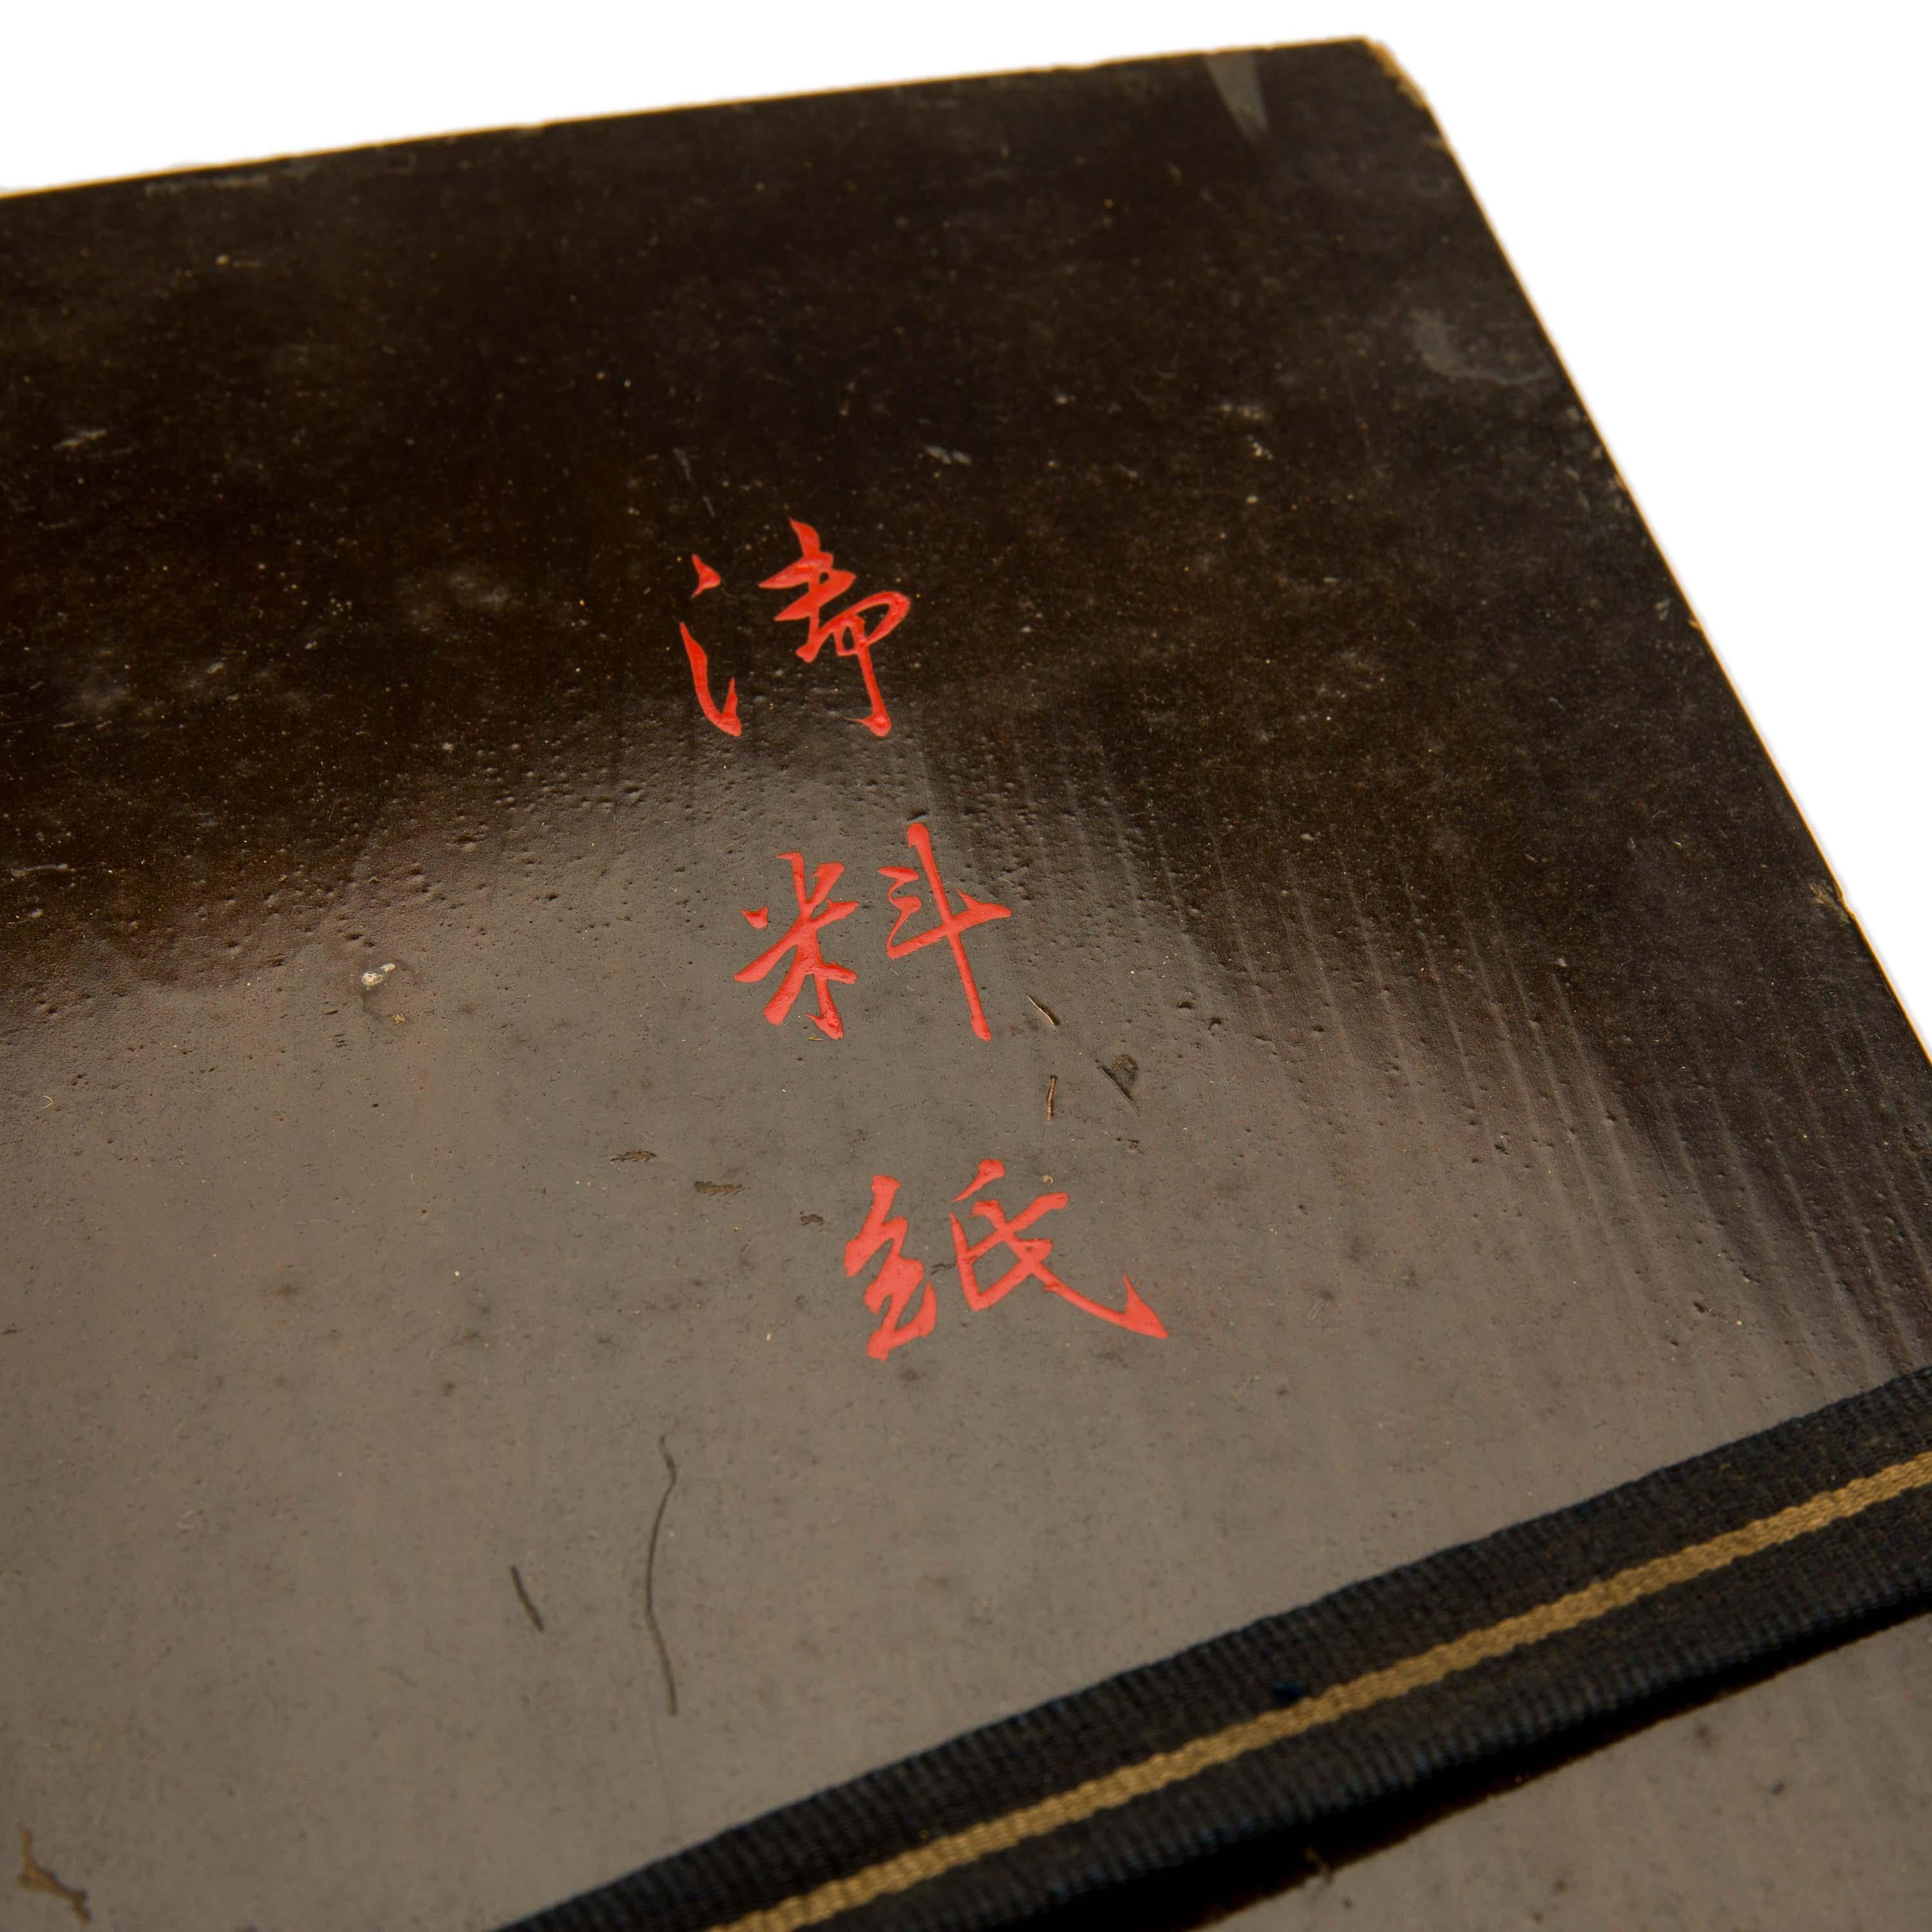 A high quality, antique, Japanese black lacquer document box. It has an external design of gold maki e plum blossoms. In Japanese culture plum blossom symbolises the beginning of Spring, having its own festival, the Ume Matsuri, alongside the more